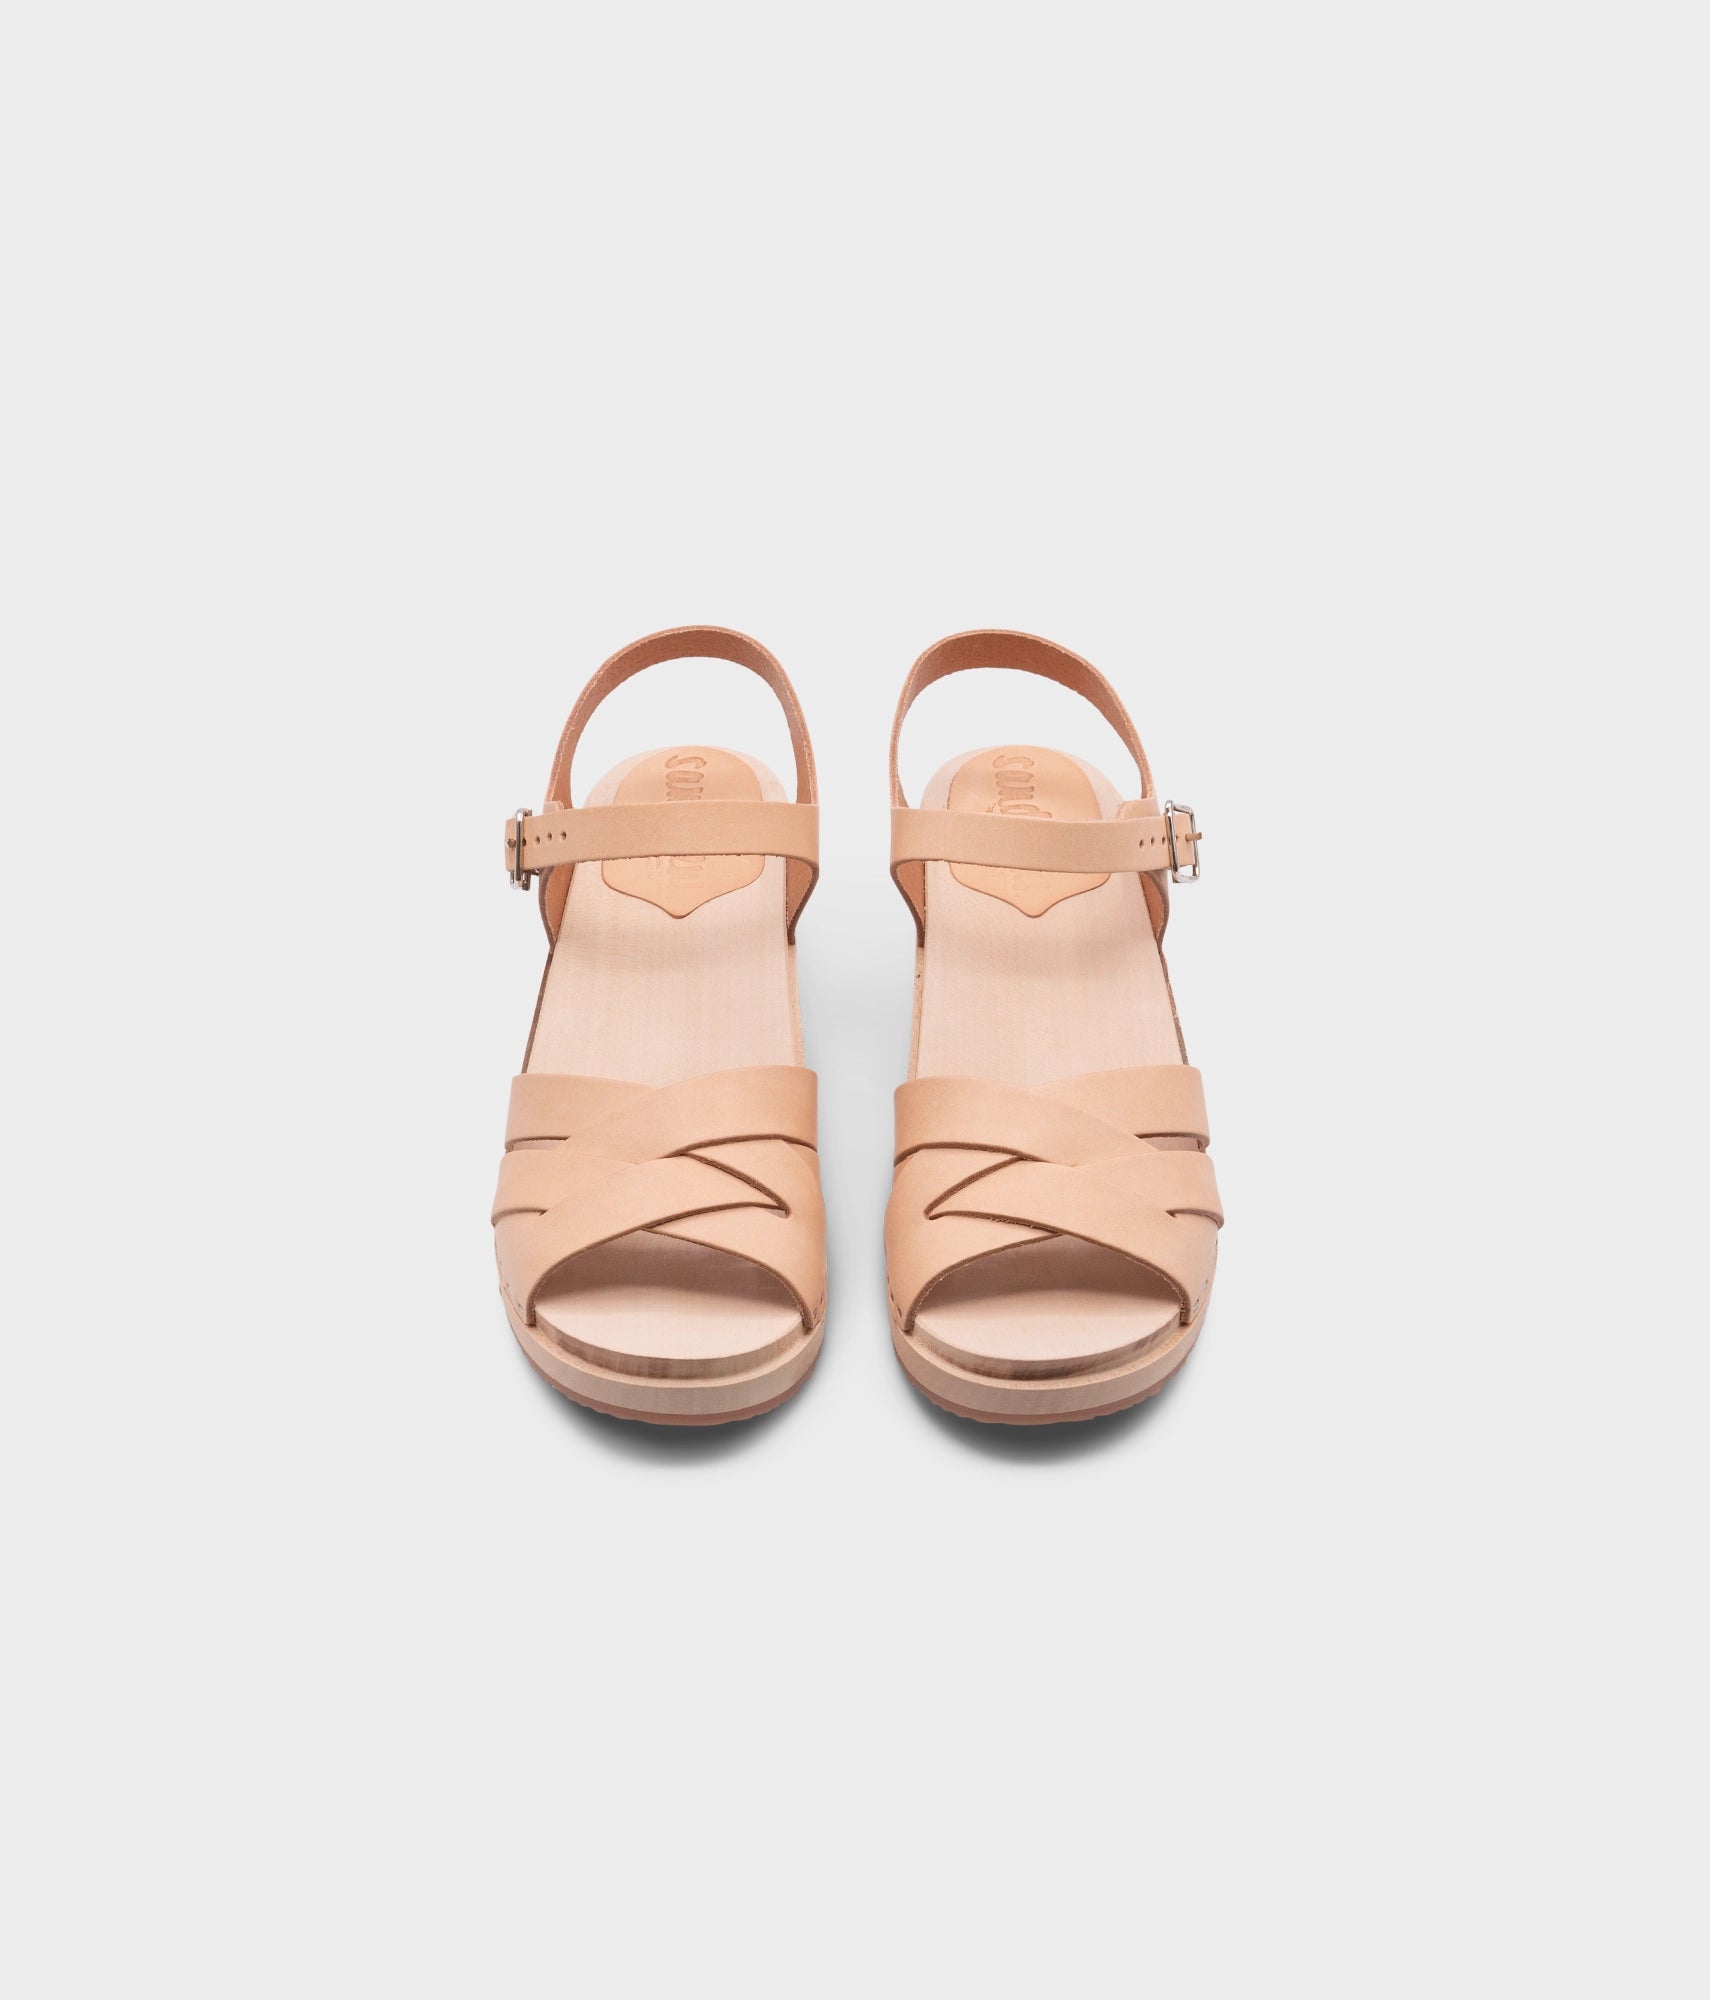 low-heeled clog sandals in ecru beige vegetable tanned leather with an open-toe stapled on a light wooden base